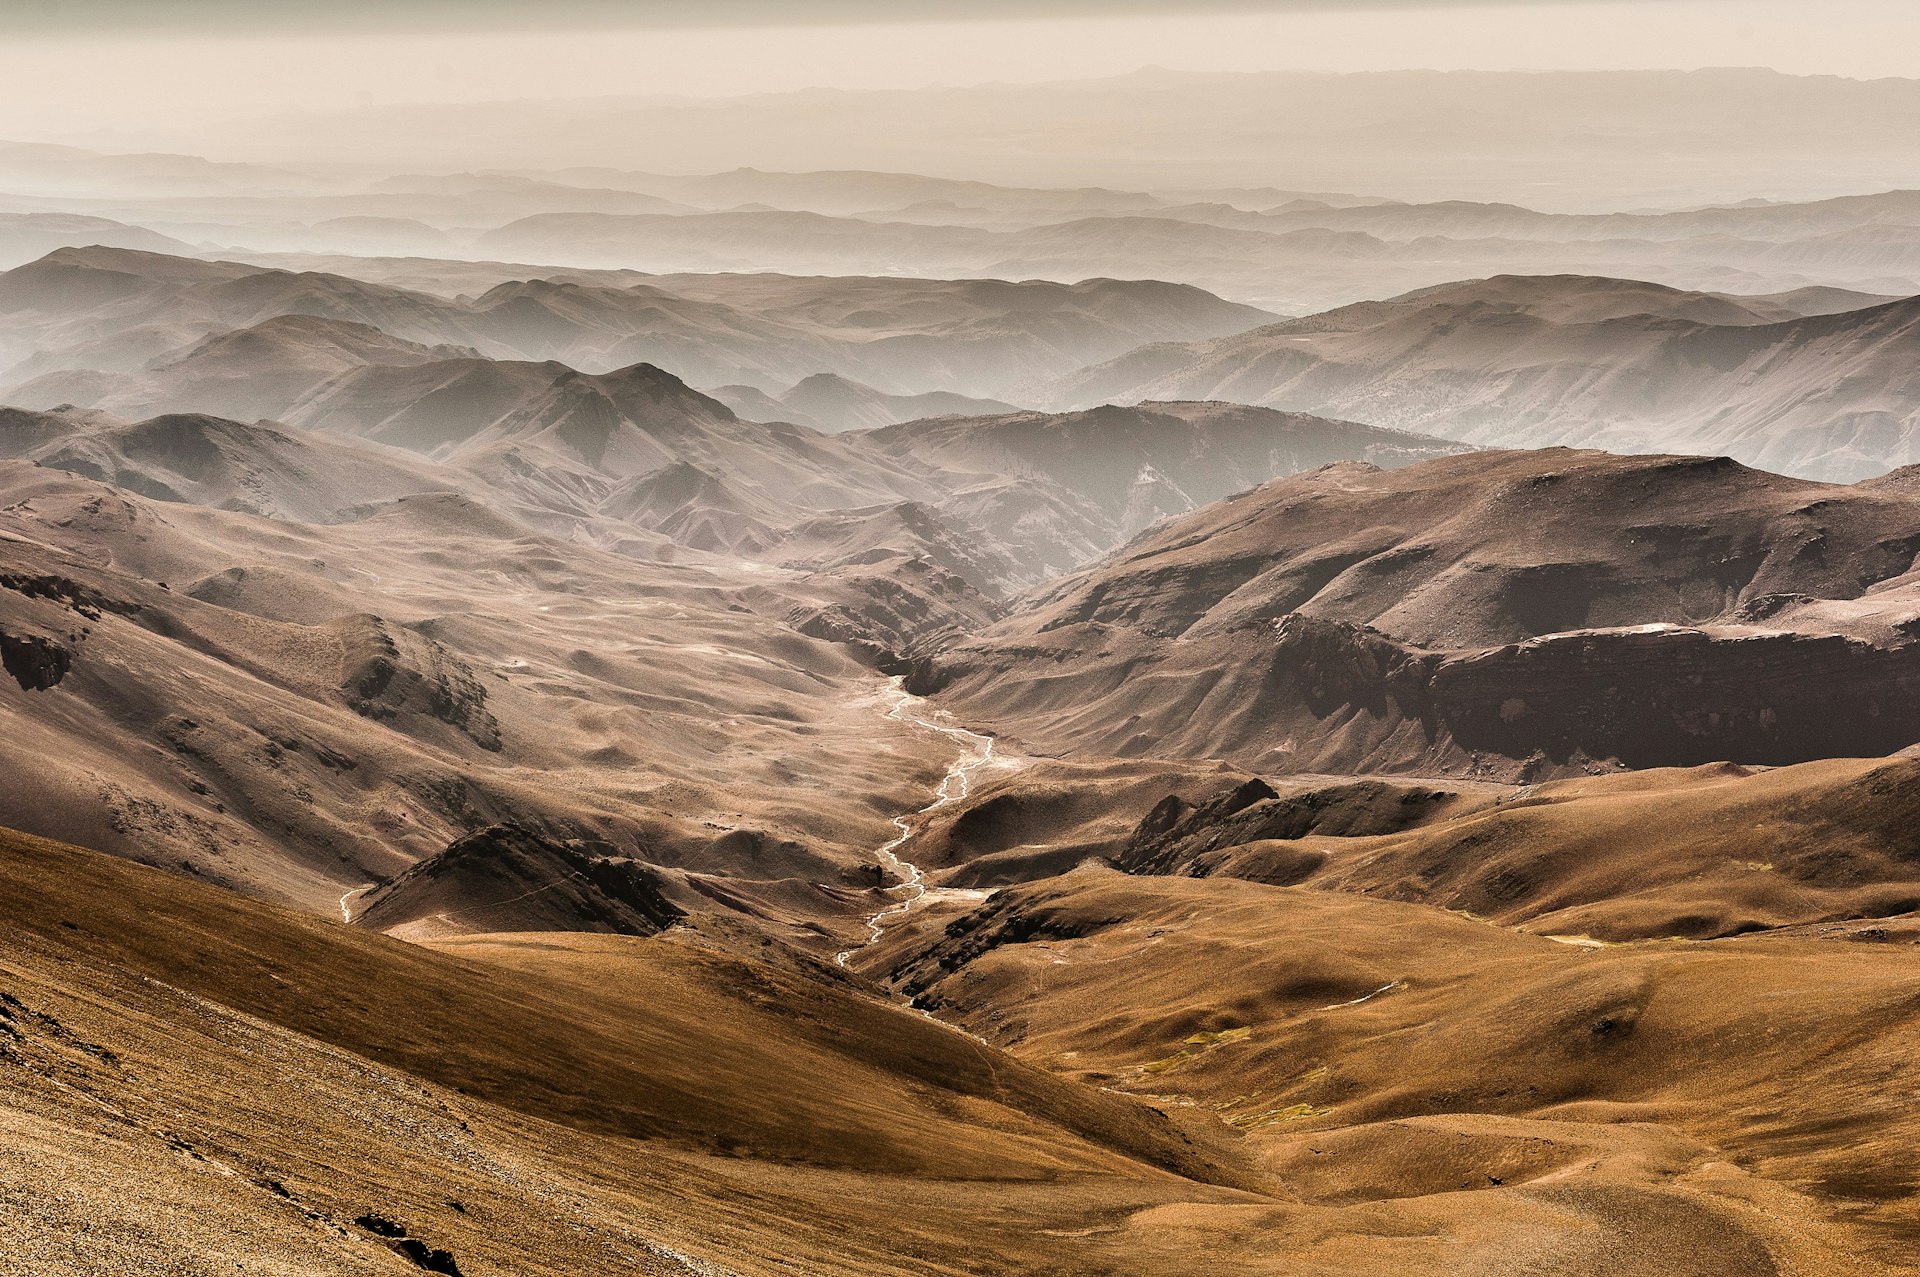 A view down over the desert-like foothills of the High Atlas Mountains; streams meander and low mist hangs in the lower valleys.